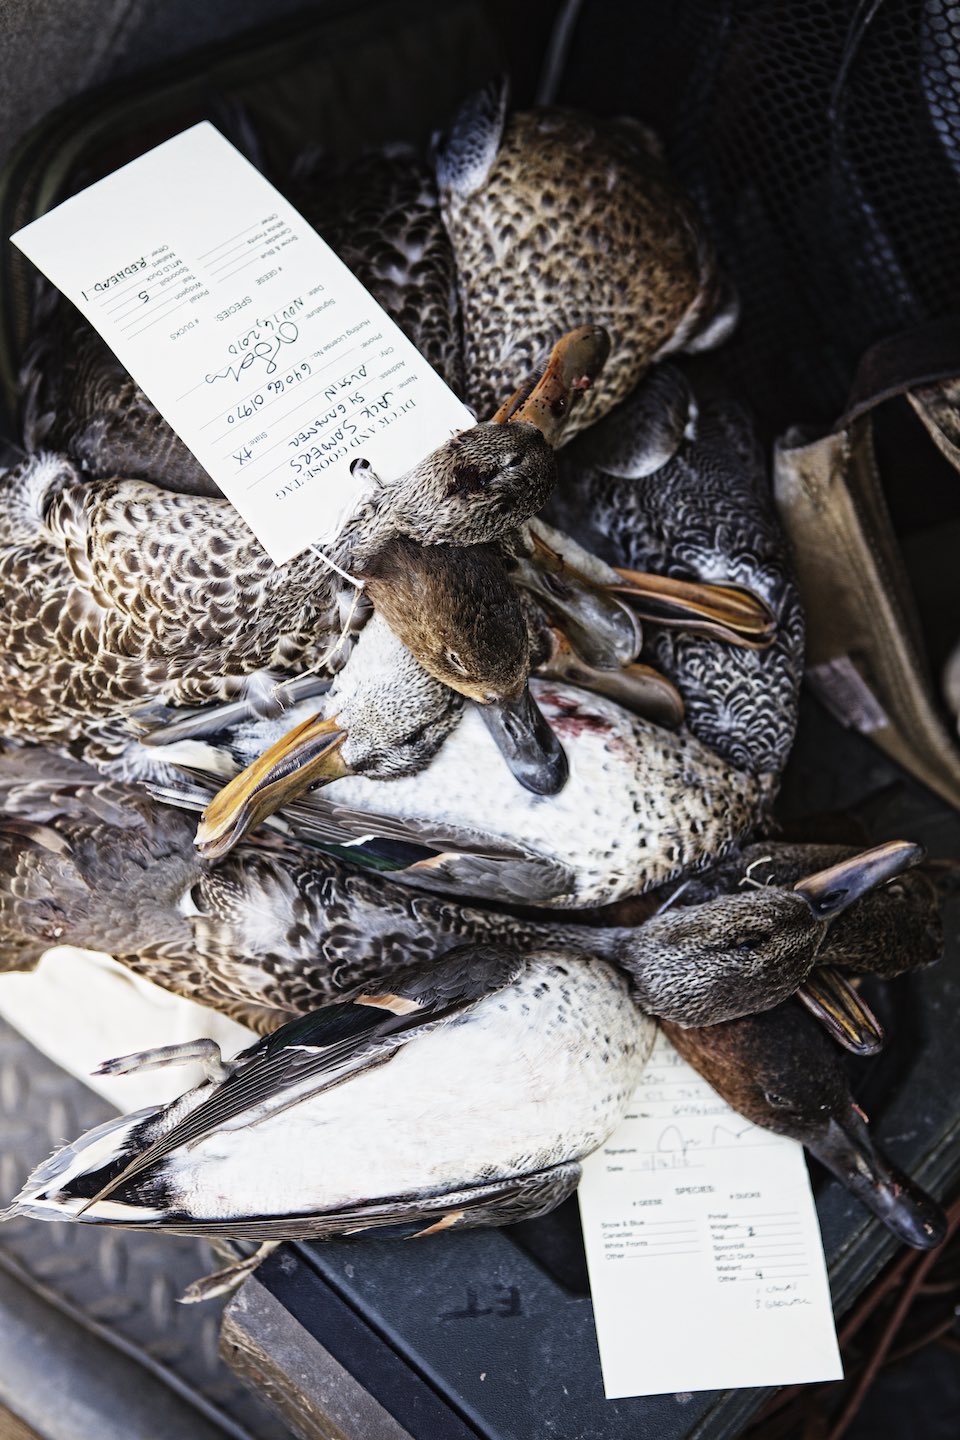 Ducks that have been killed are gathered and tagged for sale.